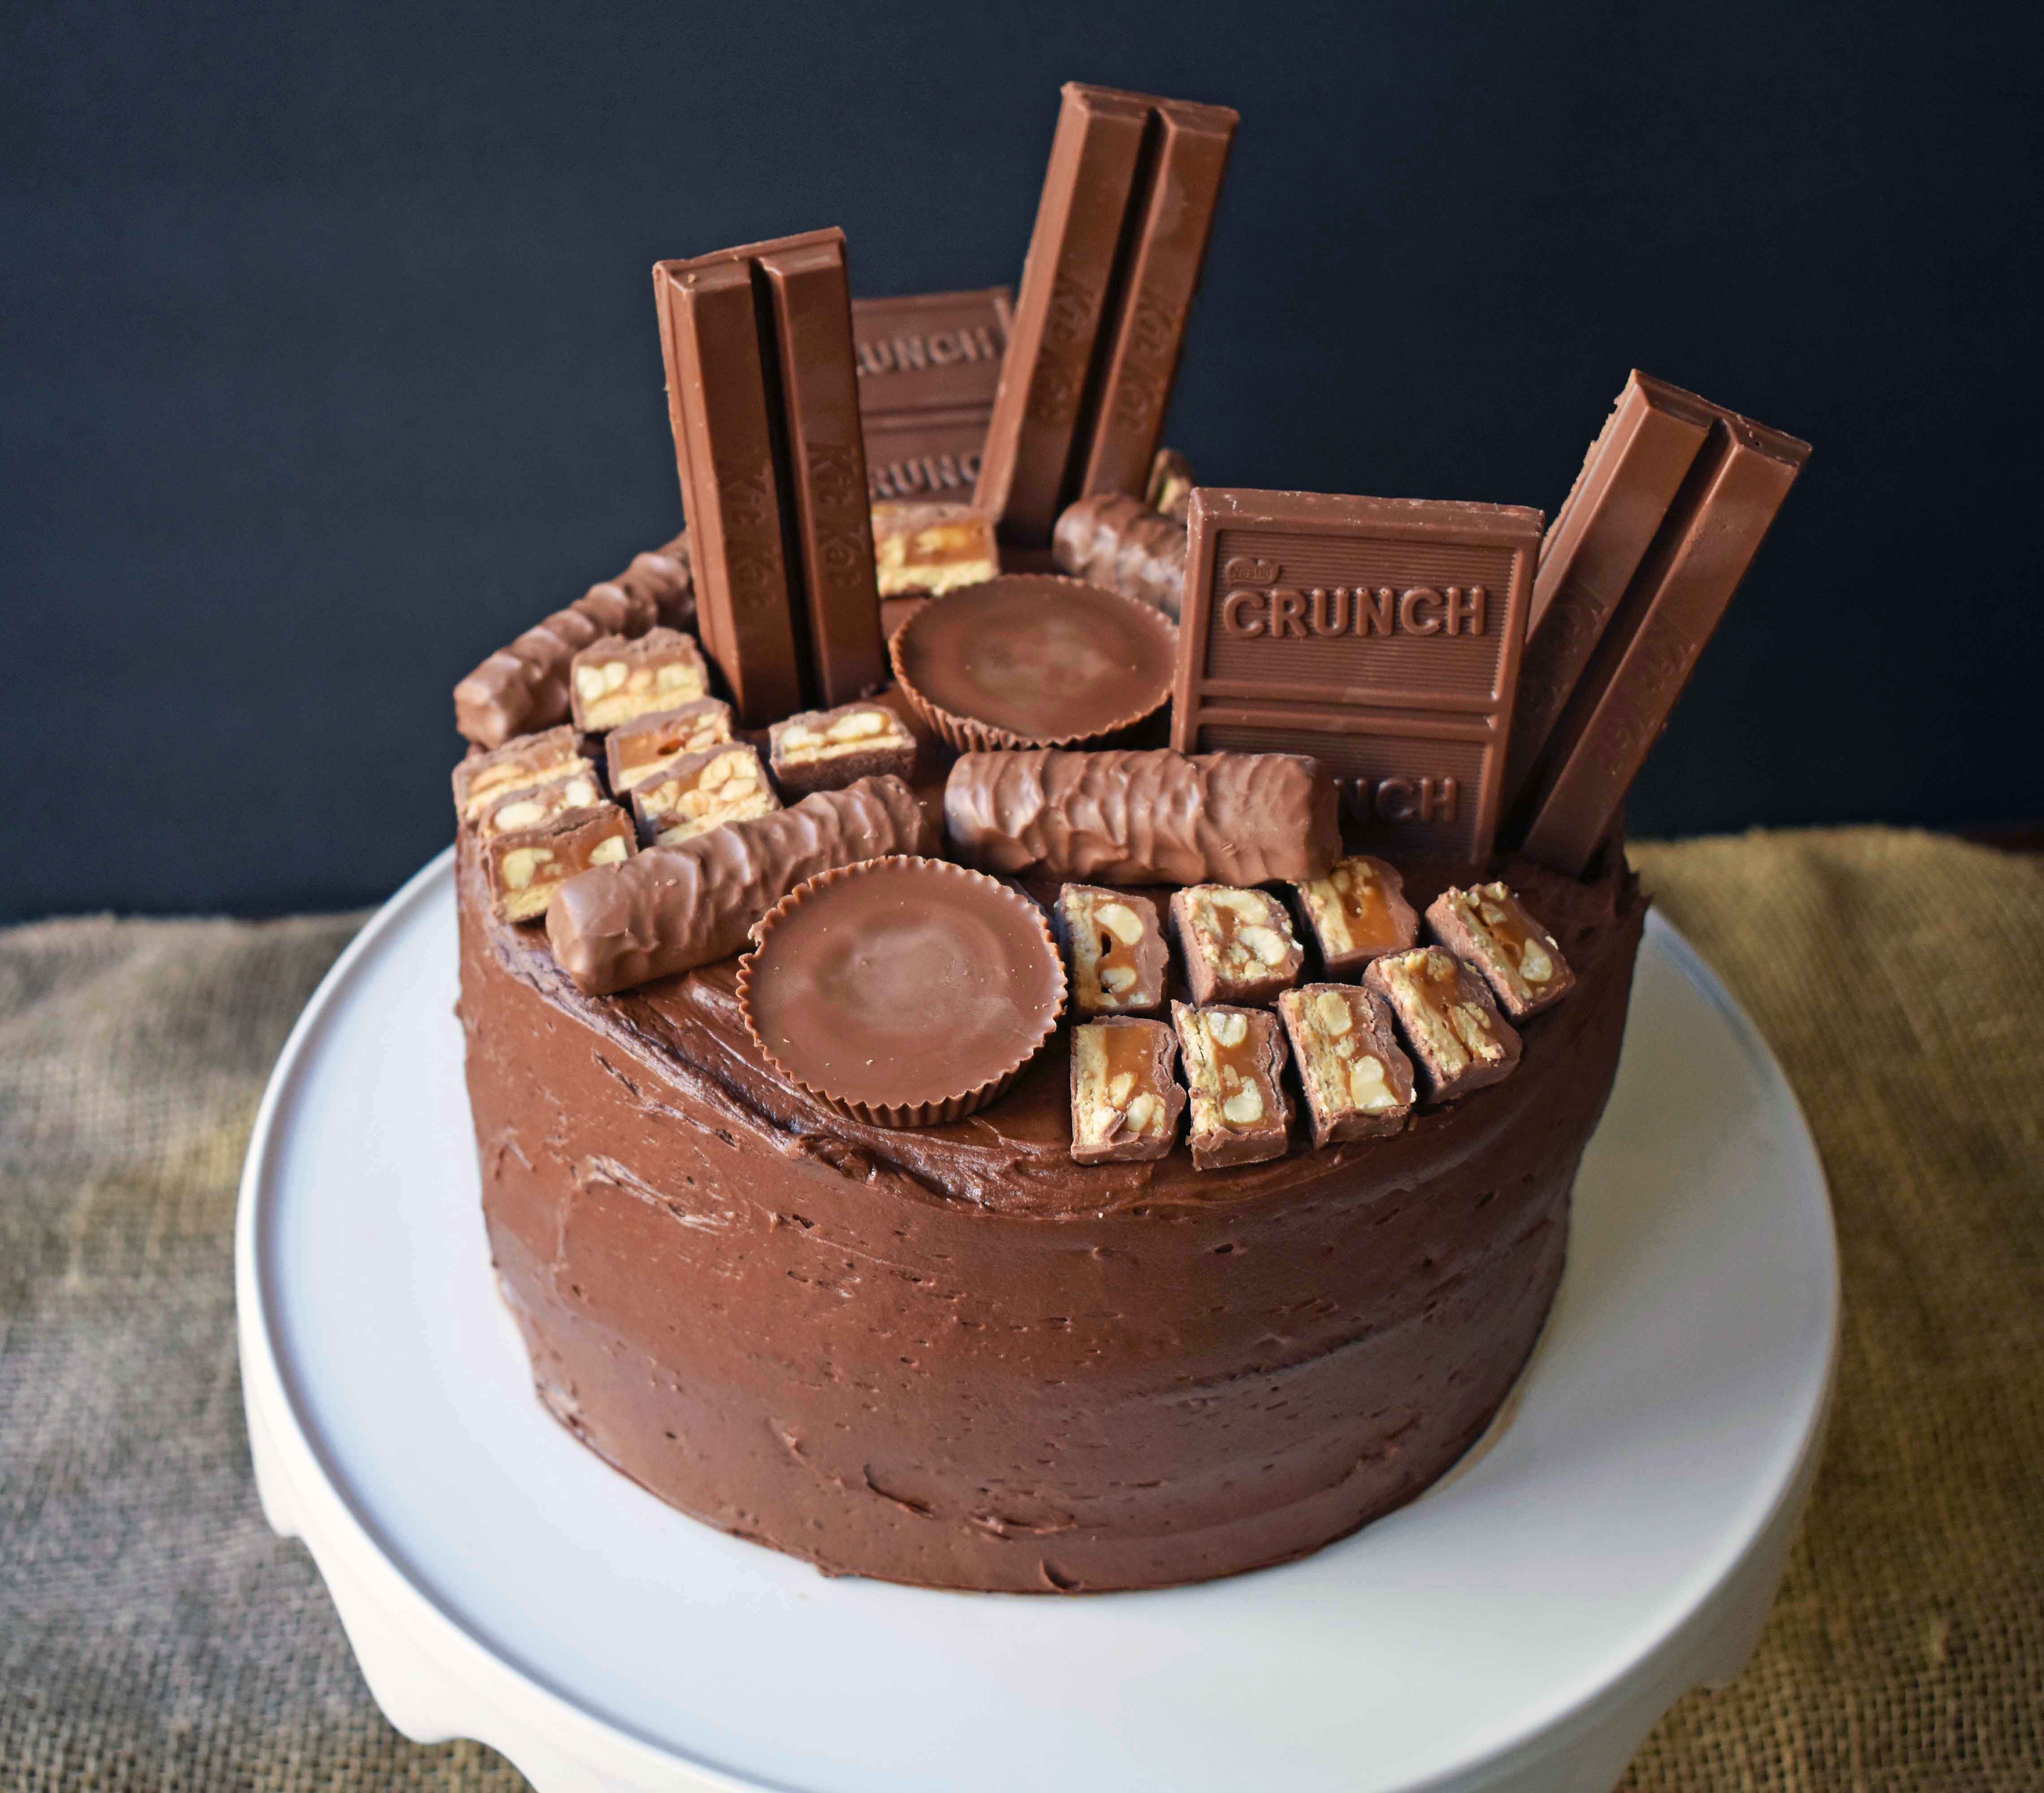 Candy Bar Stash Chocolate Cake by Modern Honey. Perfect chocolate cake topped with chocolate buttercream and the most popular candy bars. It's the ultimate Chocolate Candy Bar Cake.